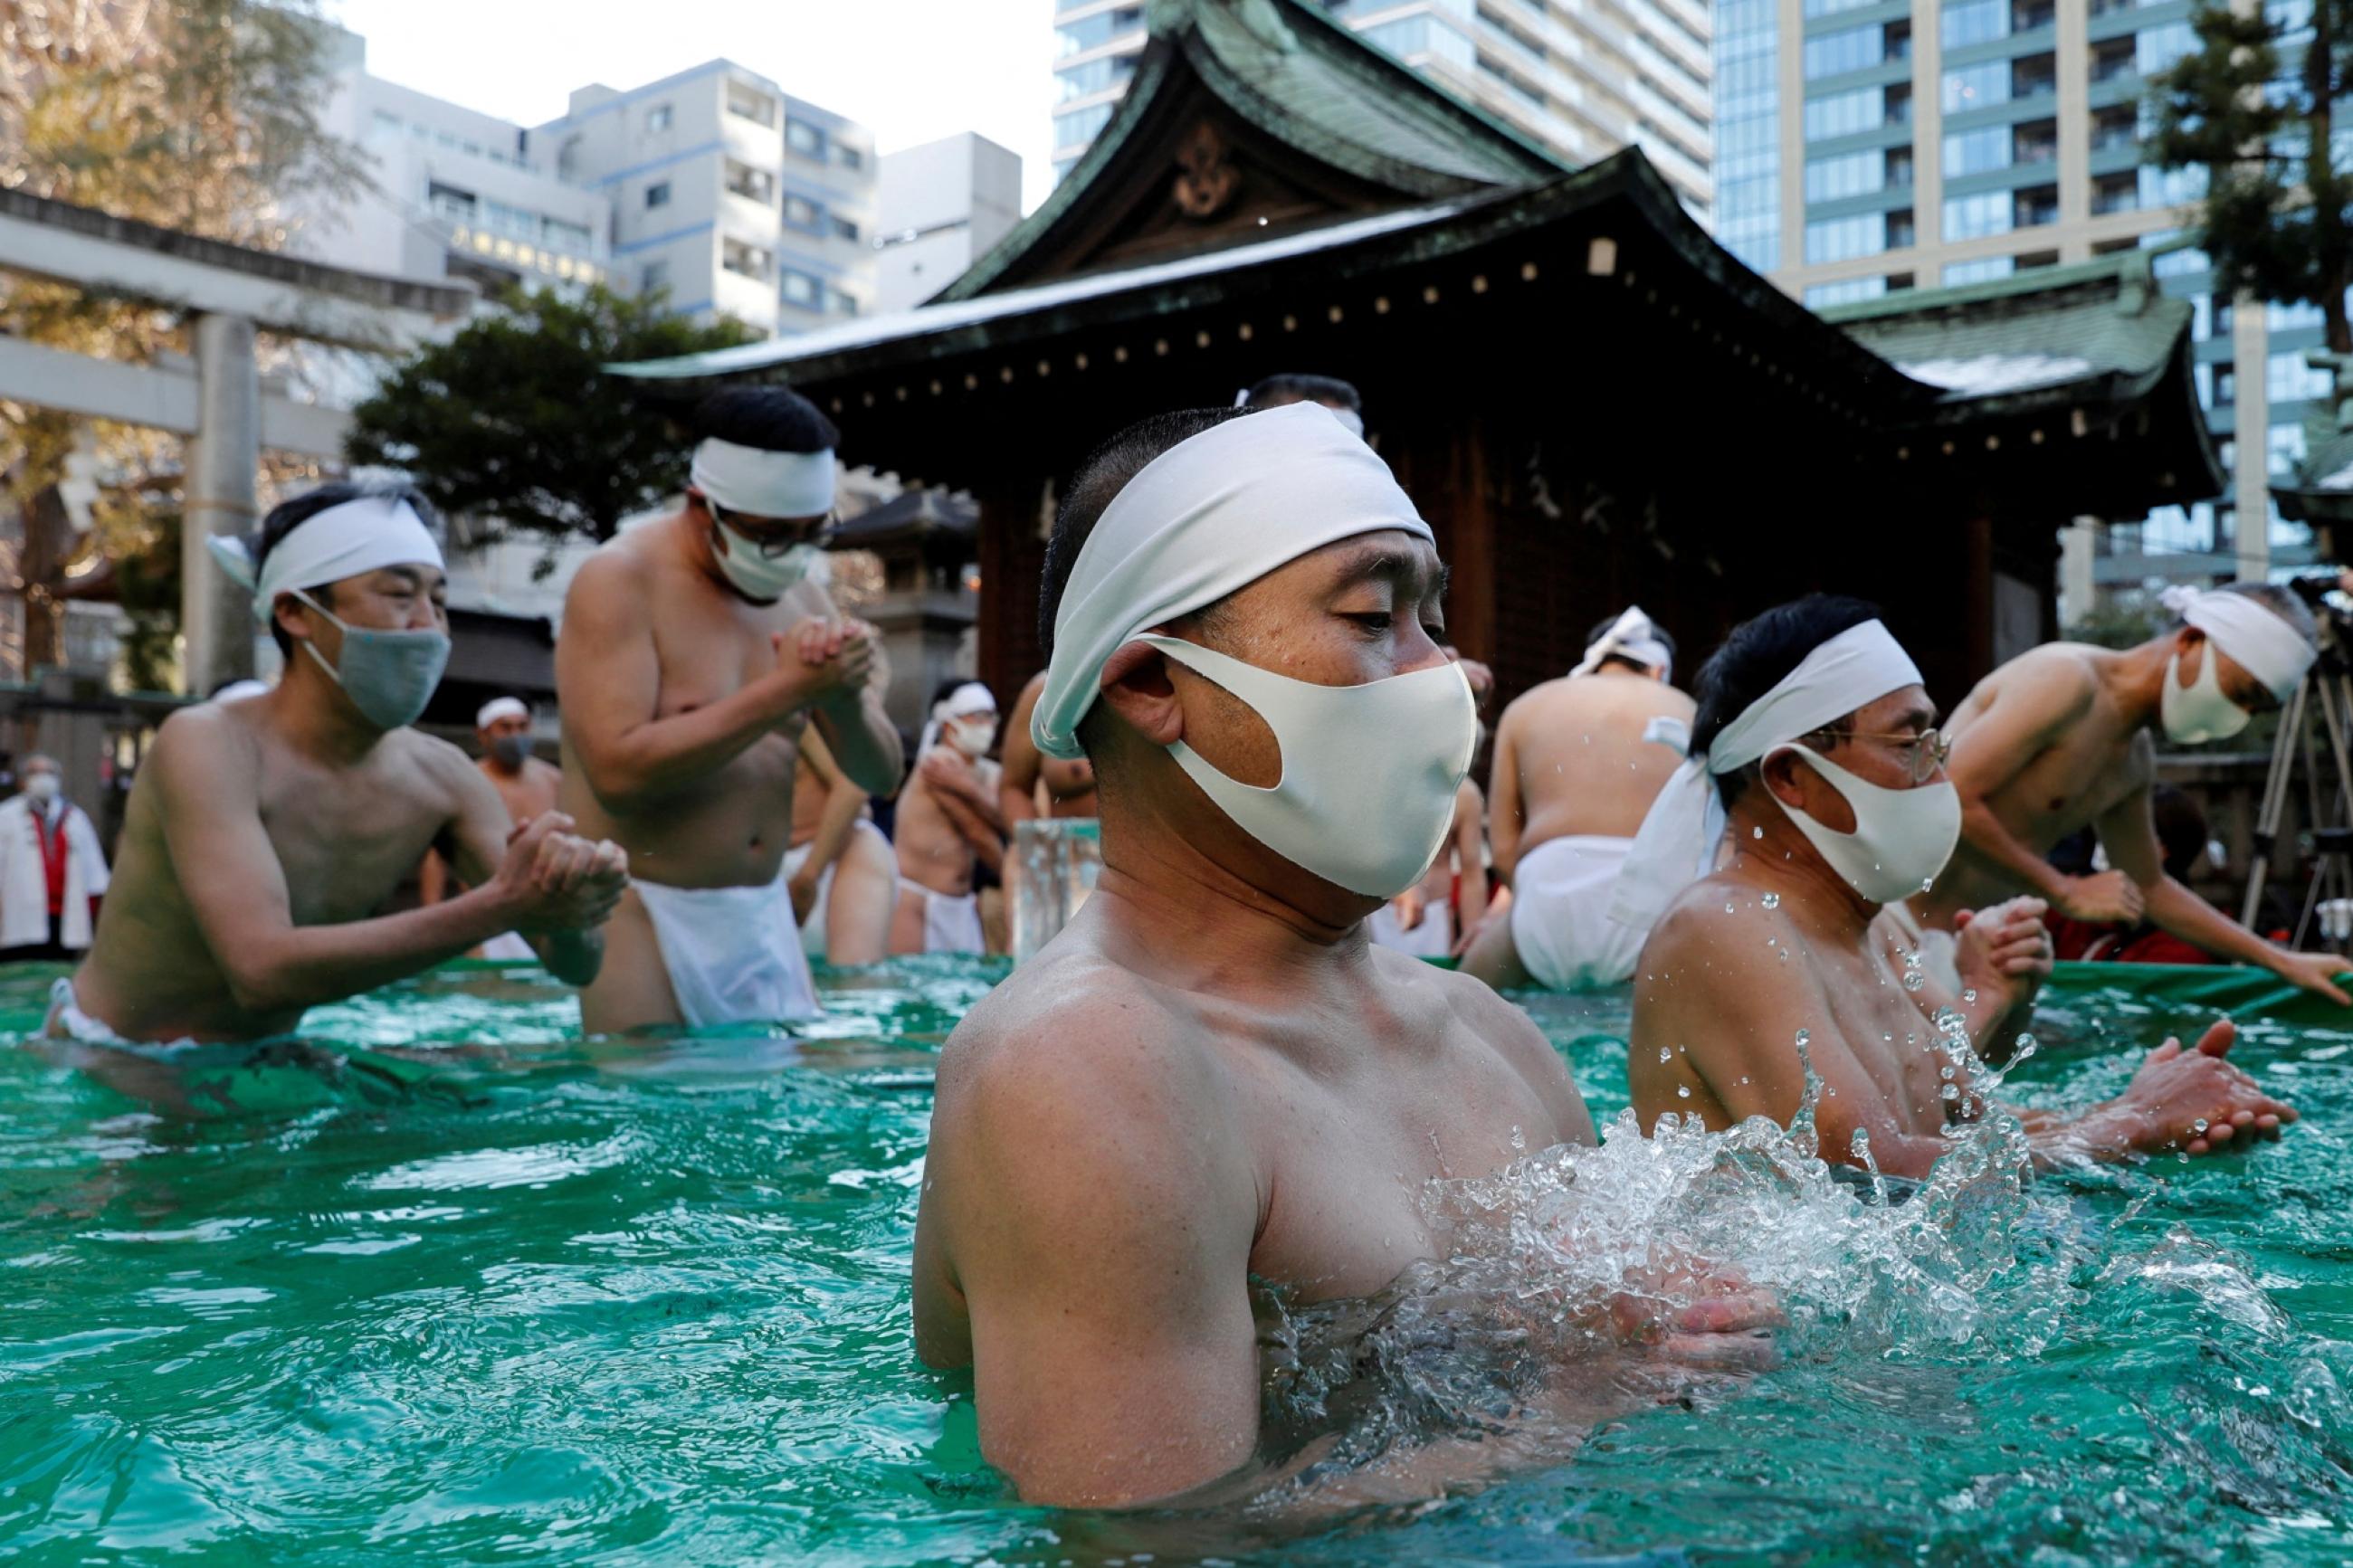 Participants wearing protective face masks amid the coronavirus disease (COVID-19) outbreak, pray as they take an ice-cold bath during a ceremony to purify their souls and to wish for overcoming the pandemic at the Teppozu Inari shrine in Tokyo, Japan, January 9, 2022.